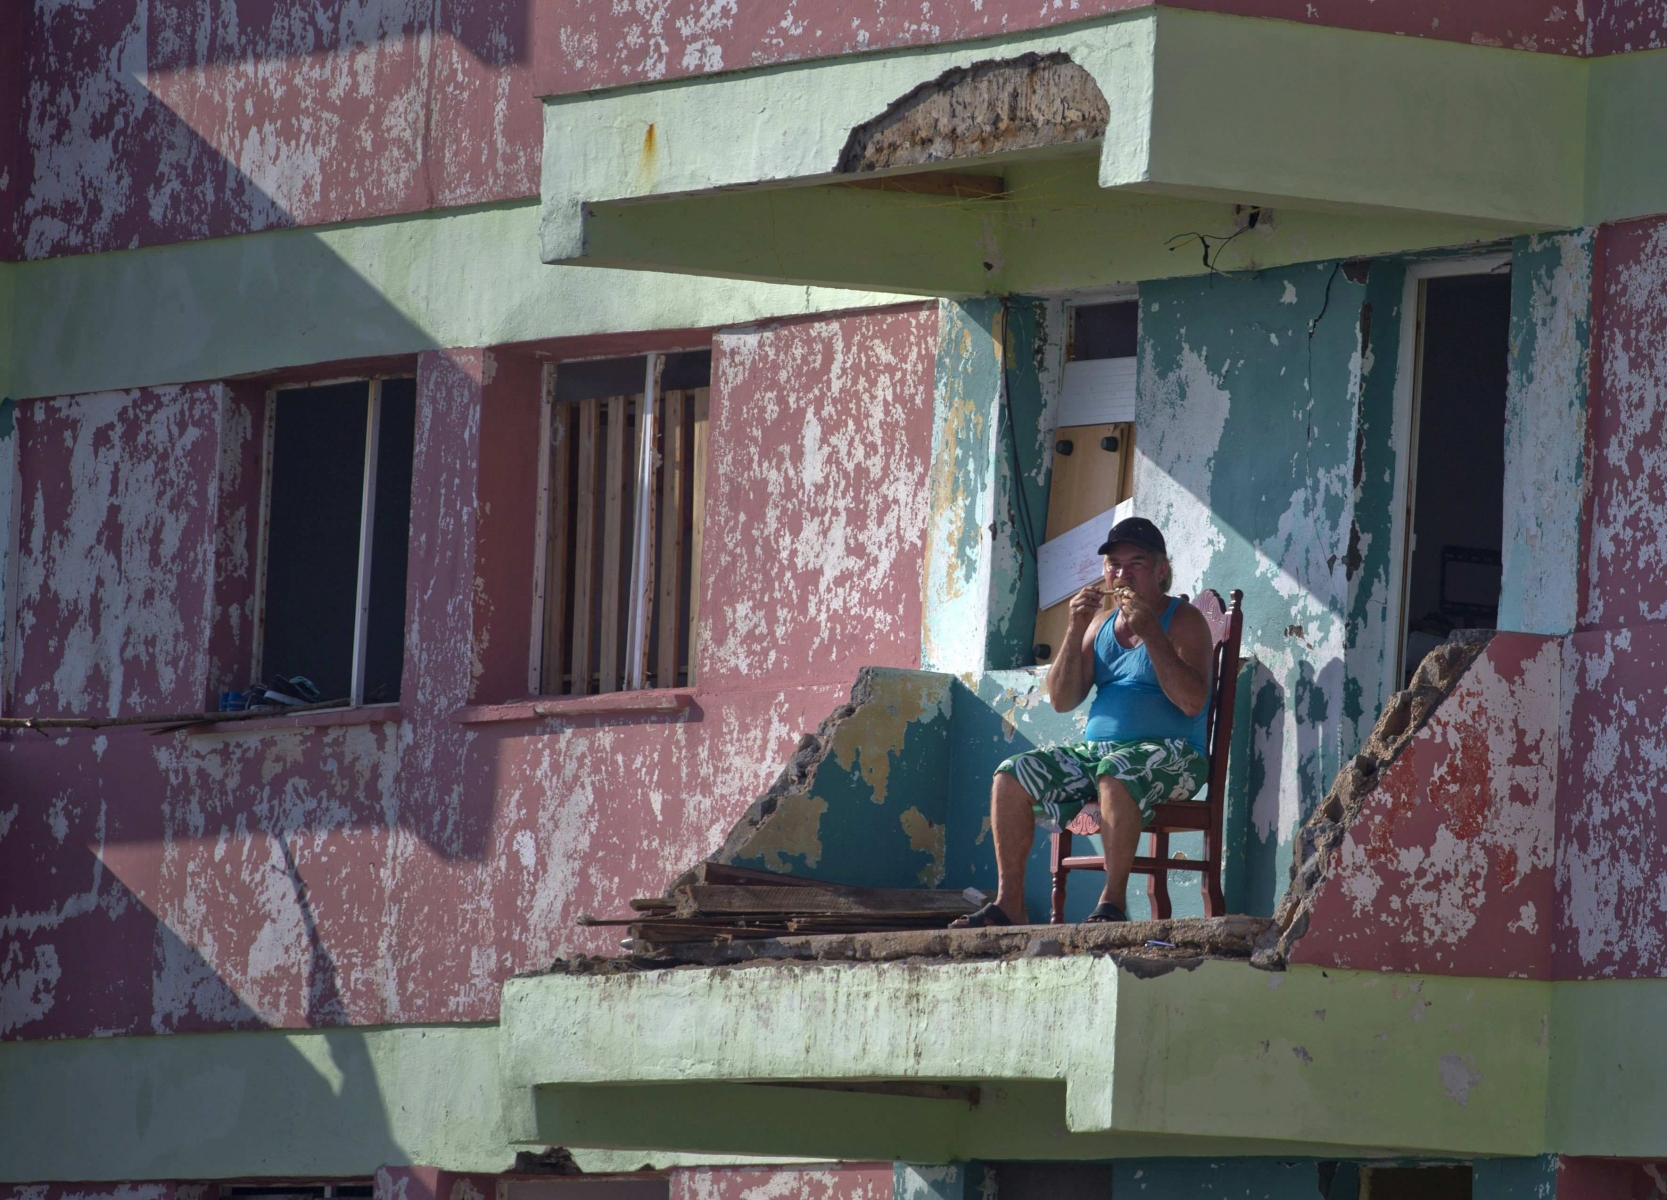 A man eats a piece of chicken while sitting on his balcony that was damaged by Hurricane Matthew, in Baracoa, Cuba, Friday, Oct. 7, 2016. Matthew hit Cuba's lightly populated eastern tip Tuesday night, damaging hundreds of homes in the easternmost city of Baracoa but there were no reports of deaths. Nearly 380,000 people were evacuated and measures were taken to protect infrastructure. (AP Photo/Ramon Espinosa) APTOPIX Cuba Hurricane Matthew